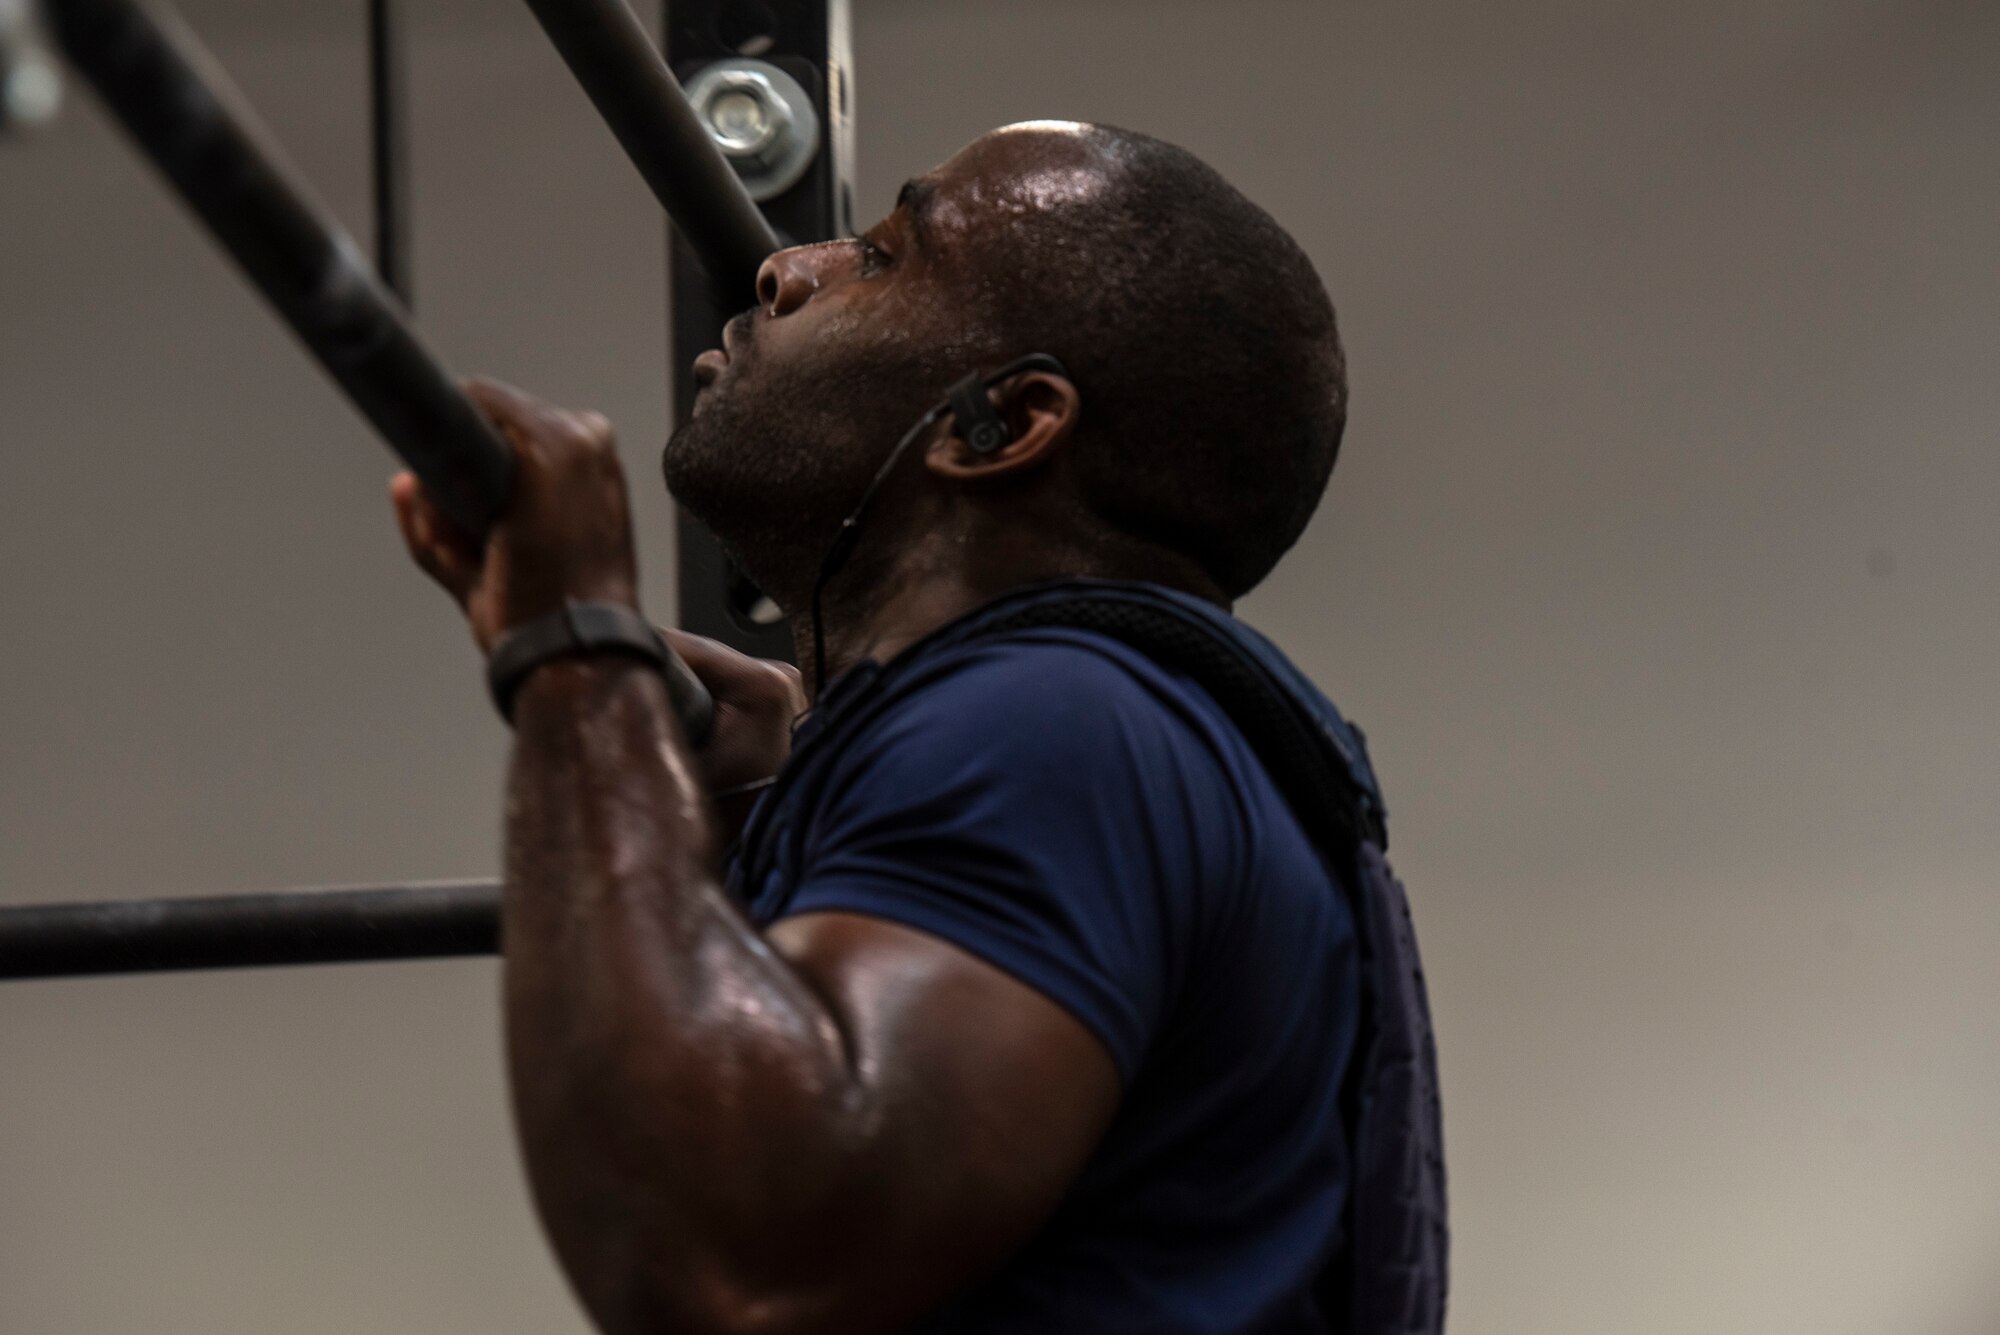 Cofie Asare, 20th Force Support Squadron golf course tournament and program coordinator, does a set of pull-ups during a “Murph challenge” at Shaw Air Force Base, South Carolina, May 28, 2019.